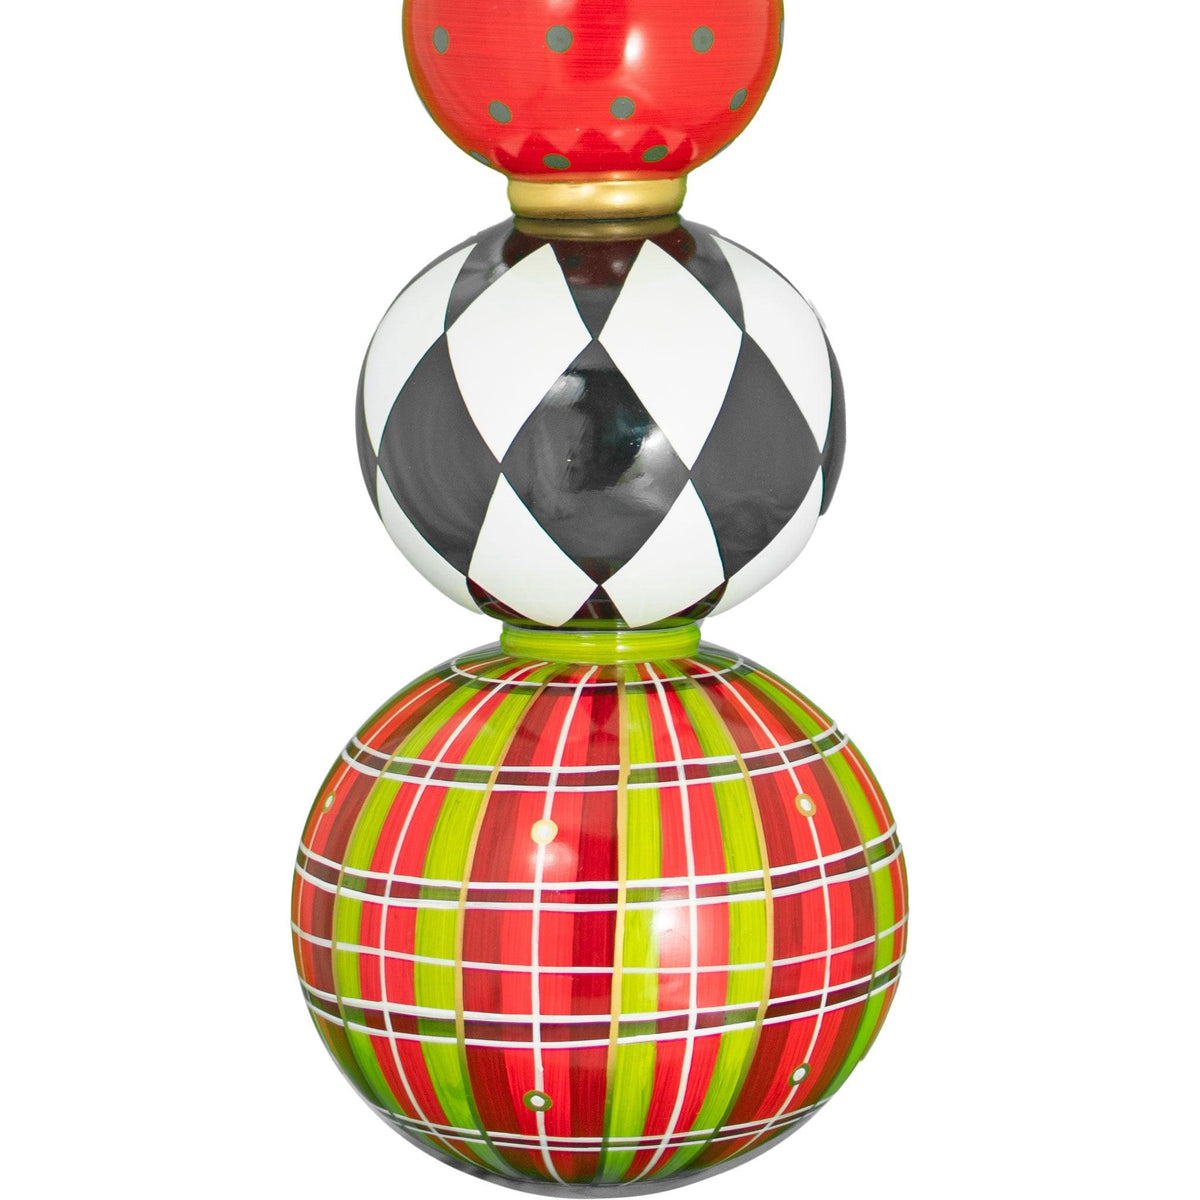 Lee Display's brand new Christmas Gumdrop Columns are available for purchase at leedisplay.com